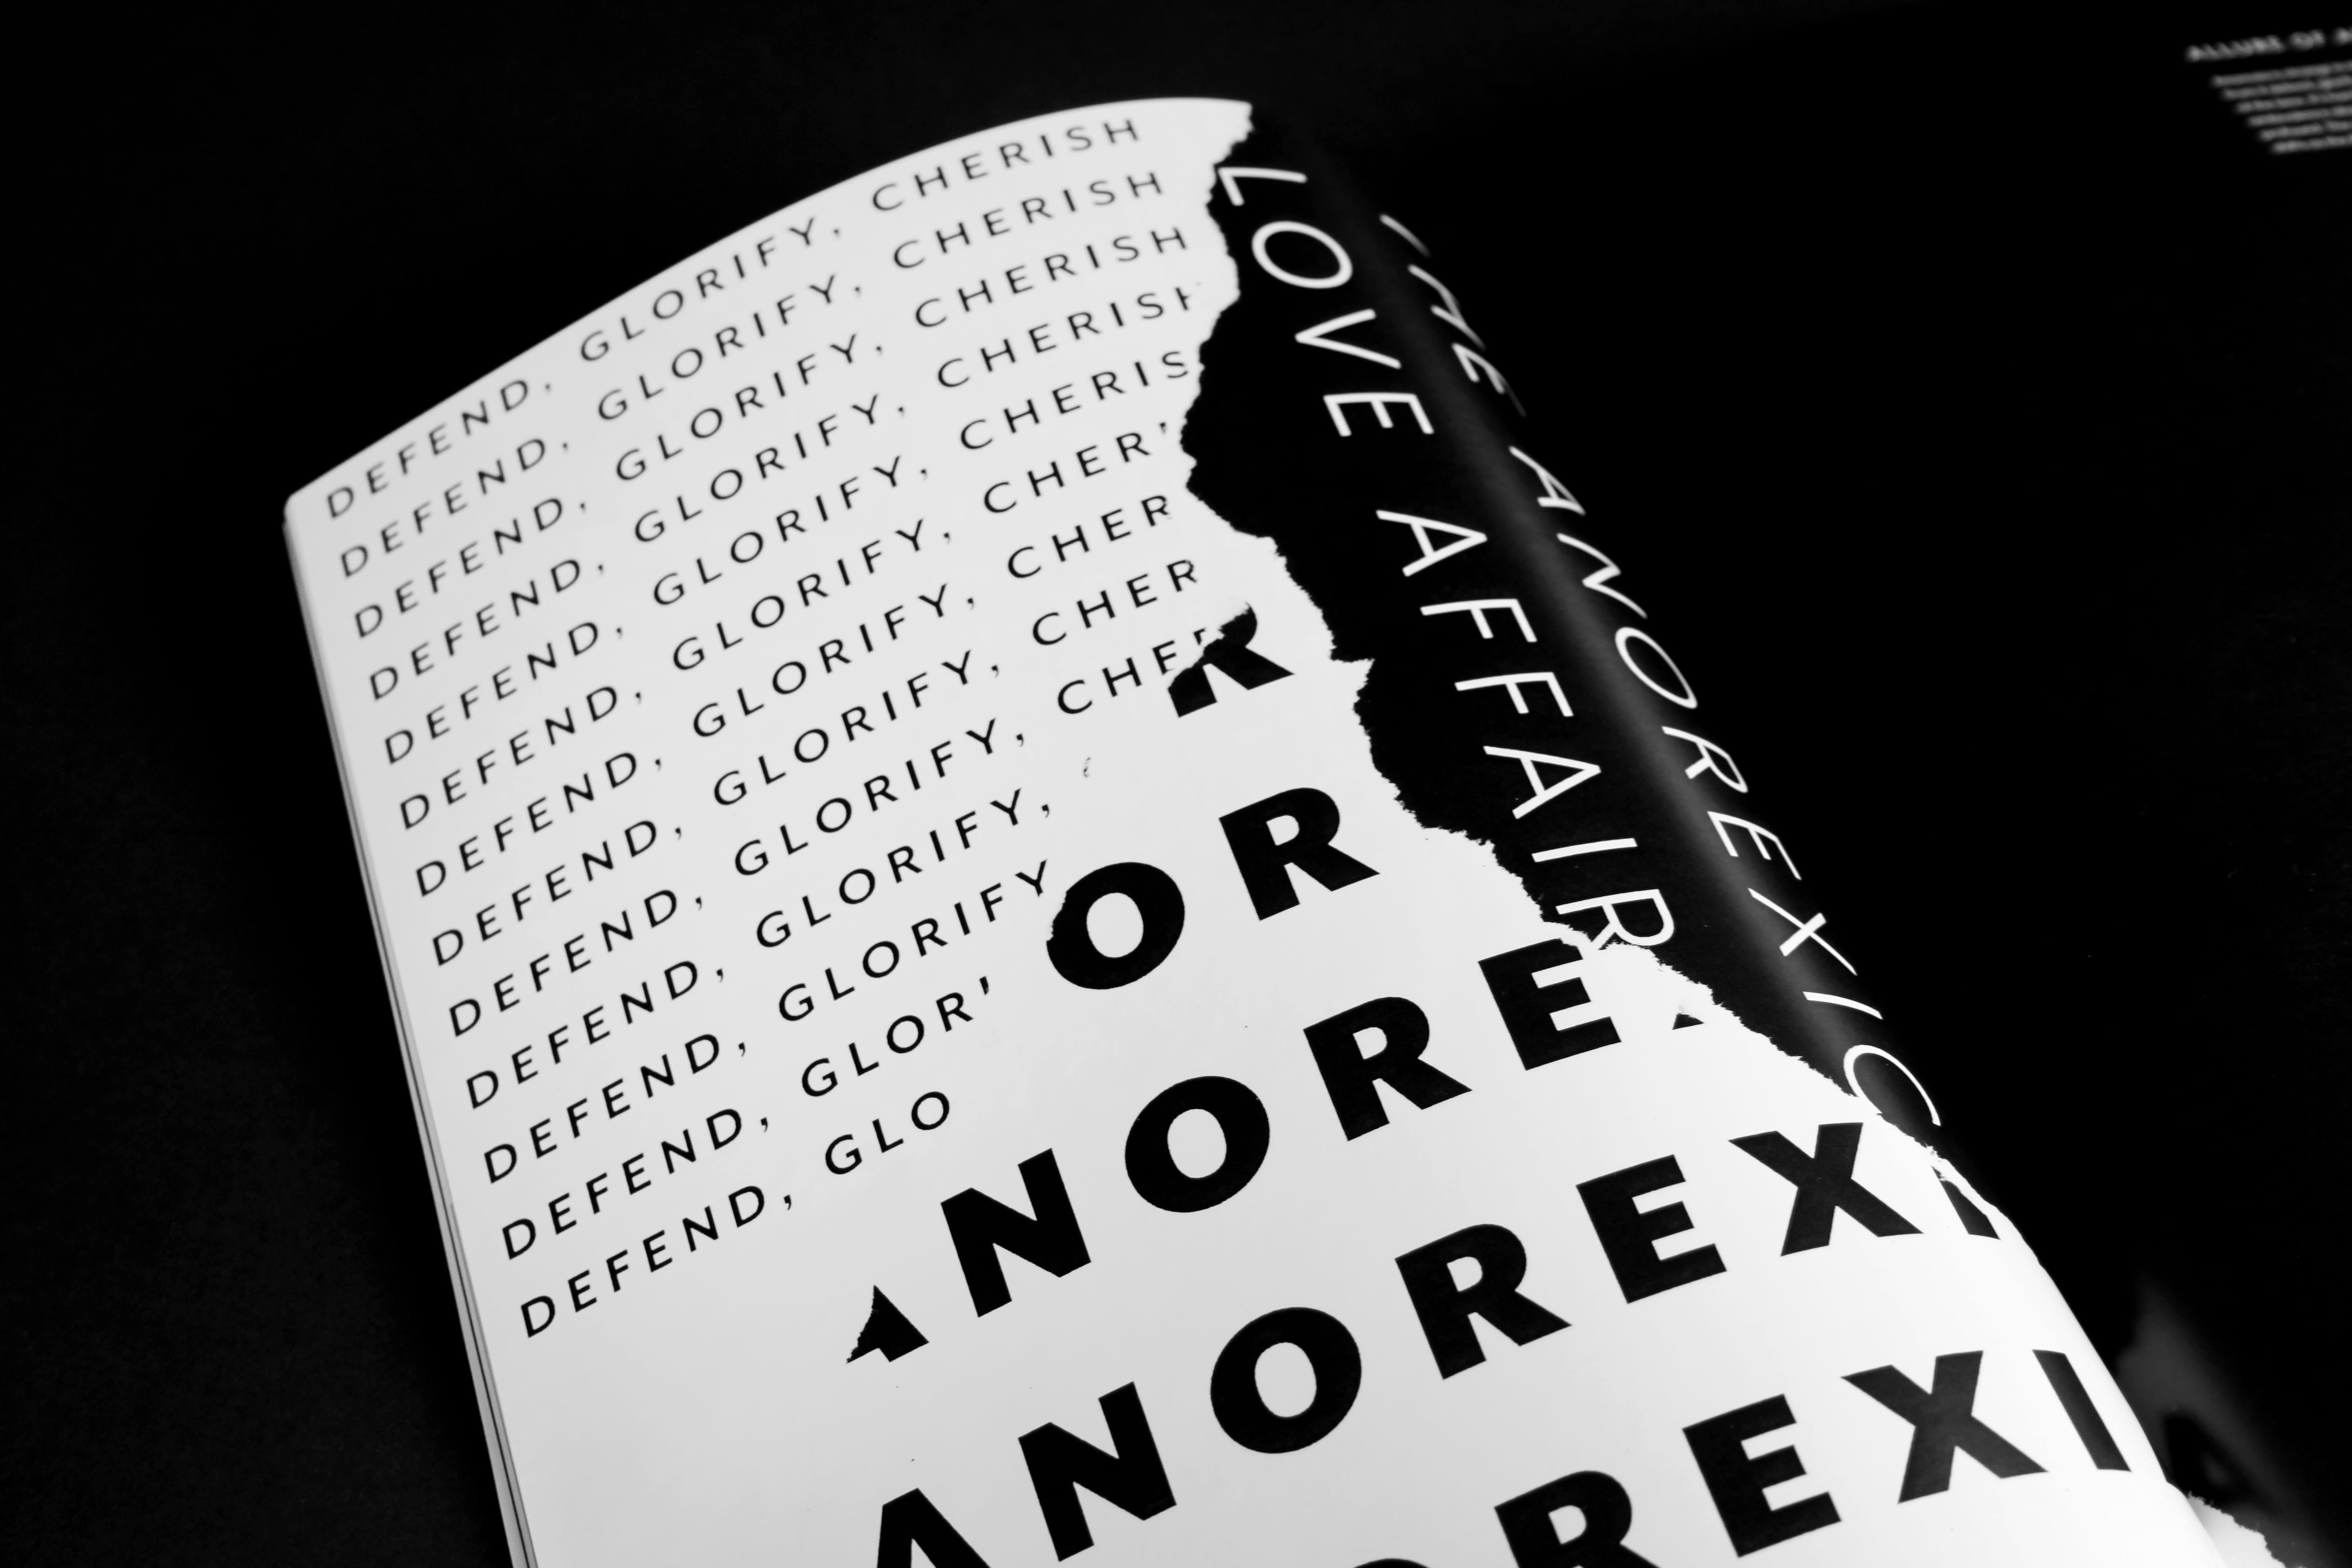 A black and white magazine with three segments of text reading: ‘Defend Glorify, Cherish’, ‘Anorexia’ , and, ‘The Anorexic Love affair’. Each is styled to resemble torn paper.